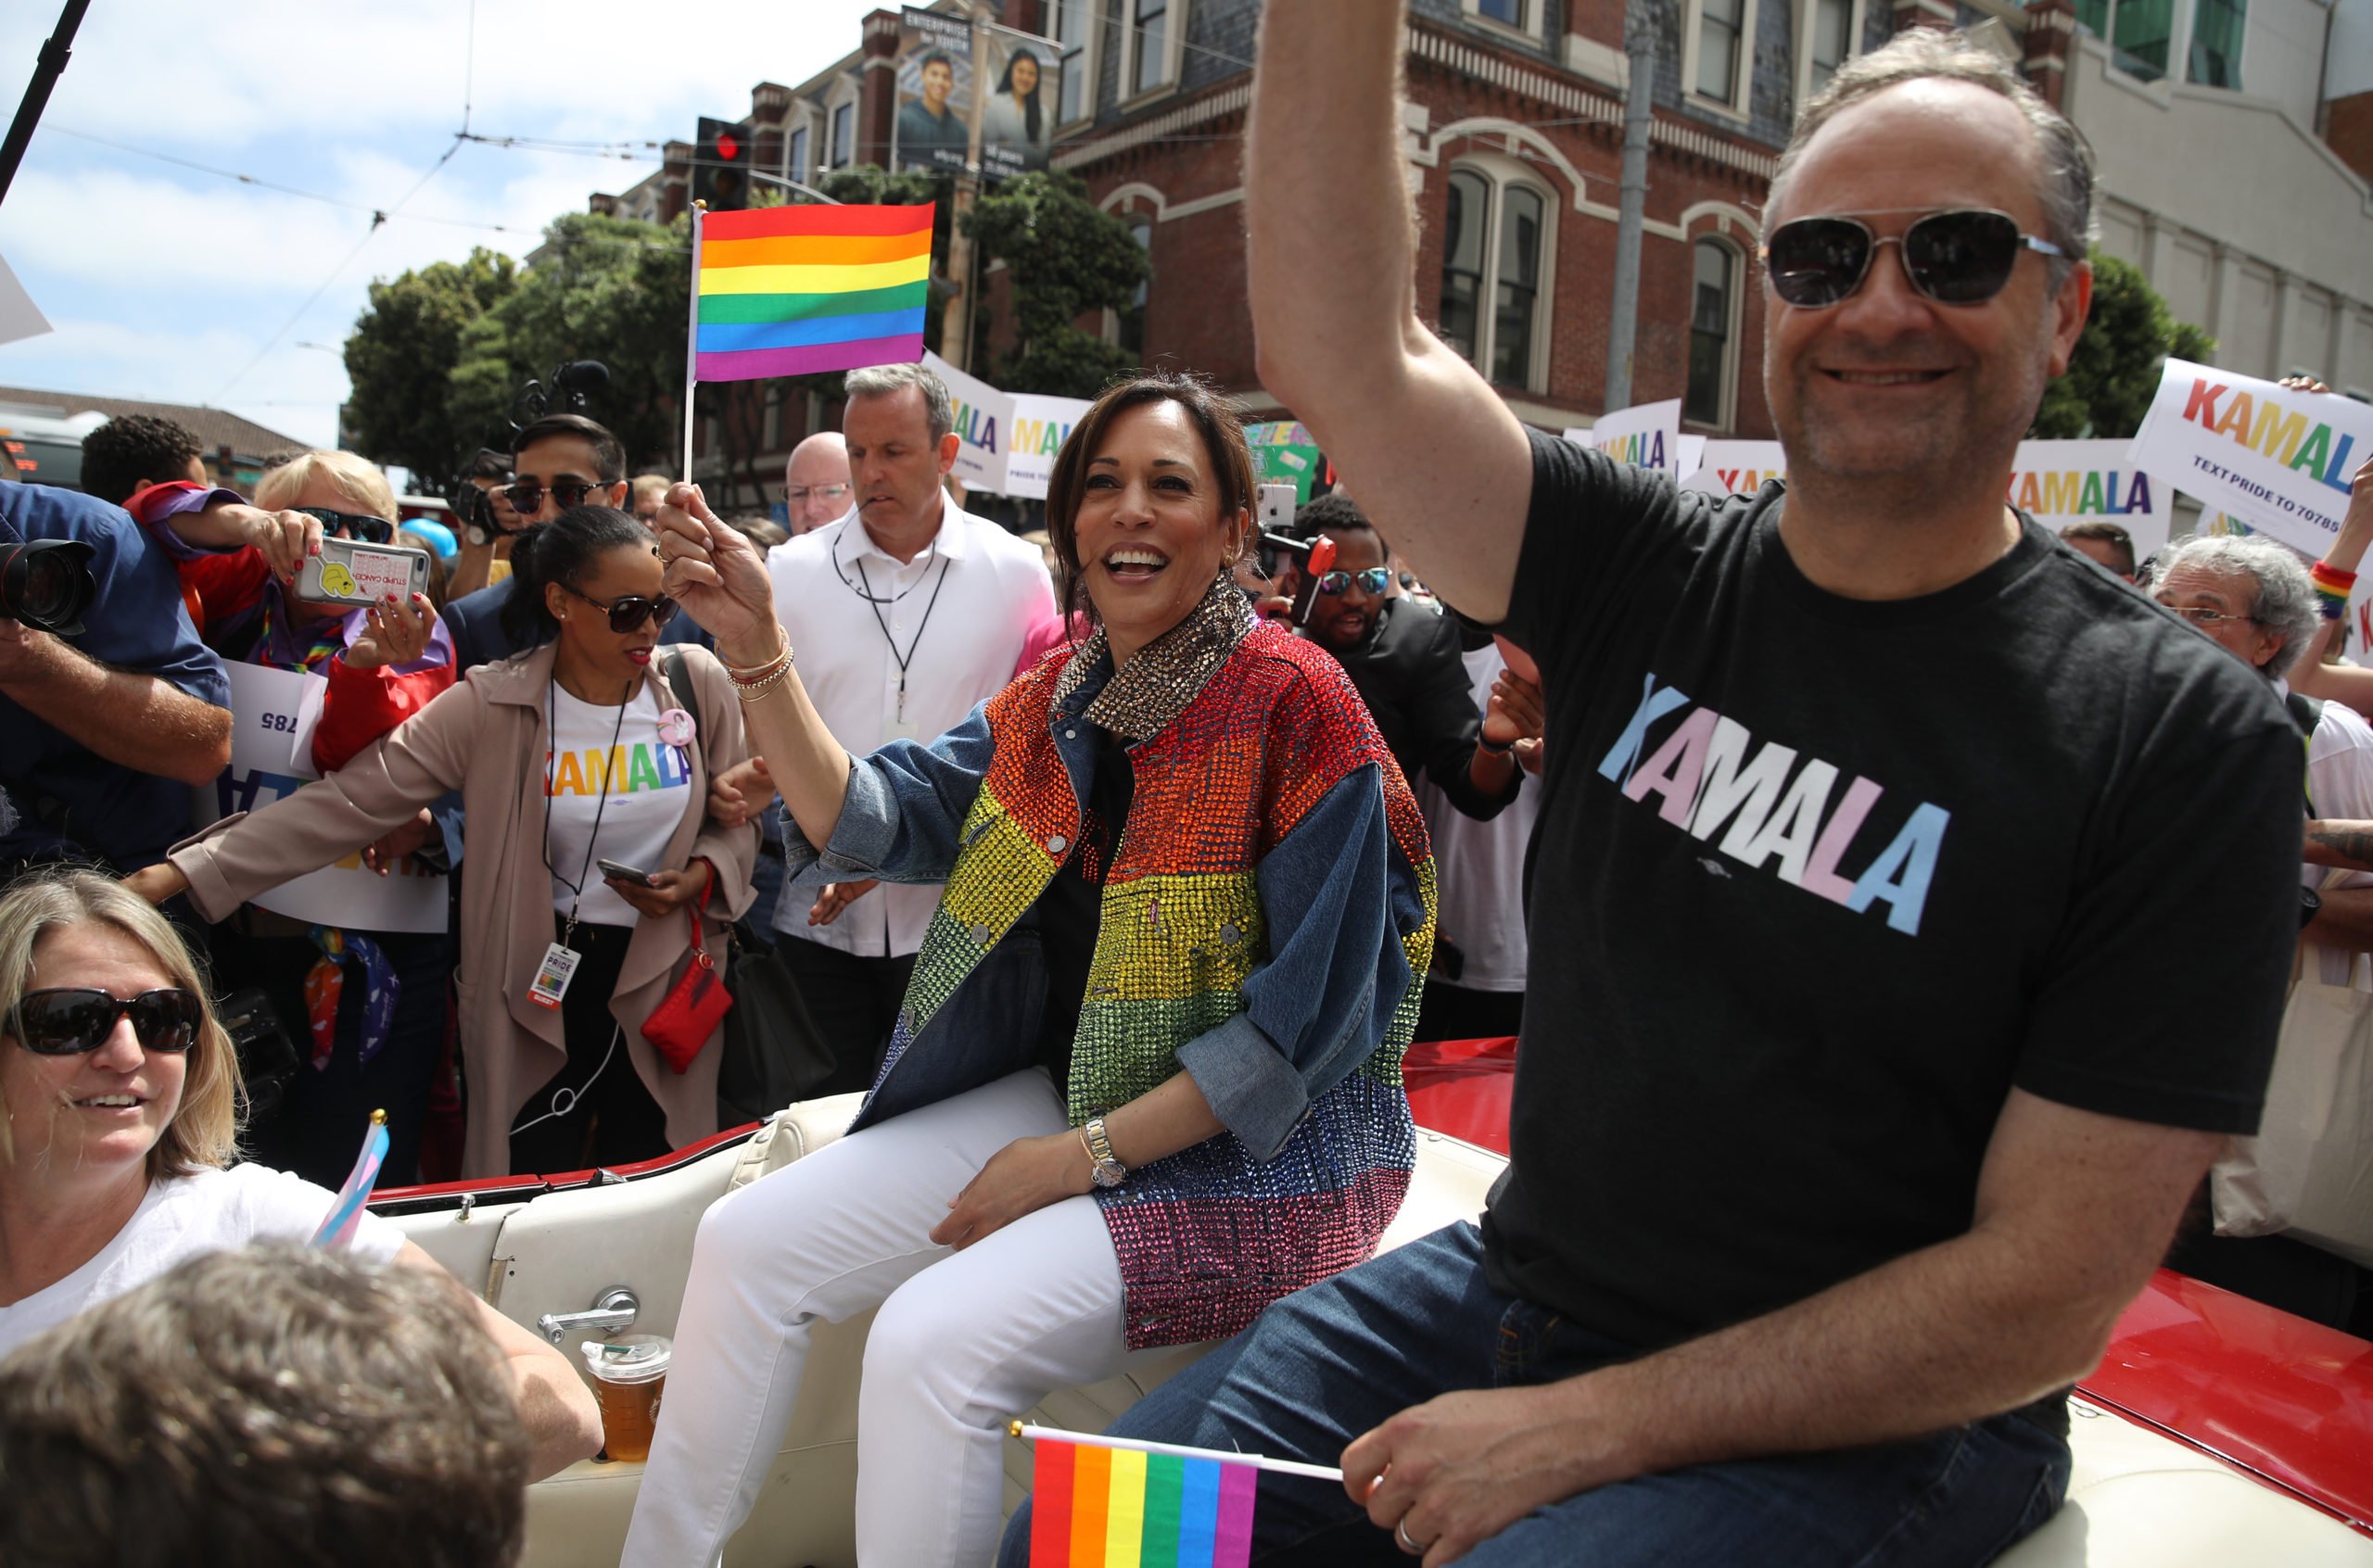 SAN FRANCISCO, CALIFORNIA - JUNE 30: Democratic presidential candidate U.S. Sen. Kamala Harris (L) (D-CA) and her husband Douglas Emhoff (R) wave to the crowd as they ride in a car during the SF Pride Parade on June 30, 2019 in San Francisco, California. Sen. Harris spent the weekend in the San Francisco Bay Area where she attended a fundraiser and the annual SF Pride Parade. (Photo by Justin Sullivan/Getty Images)